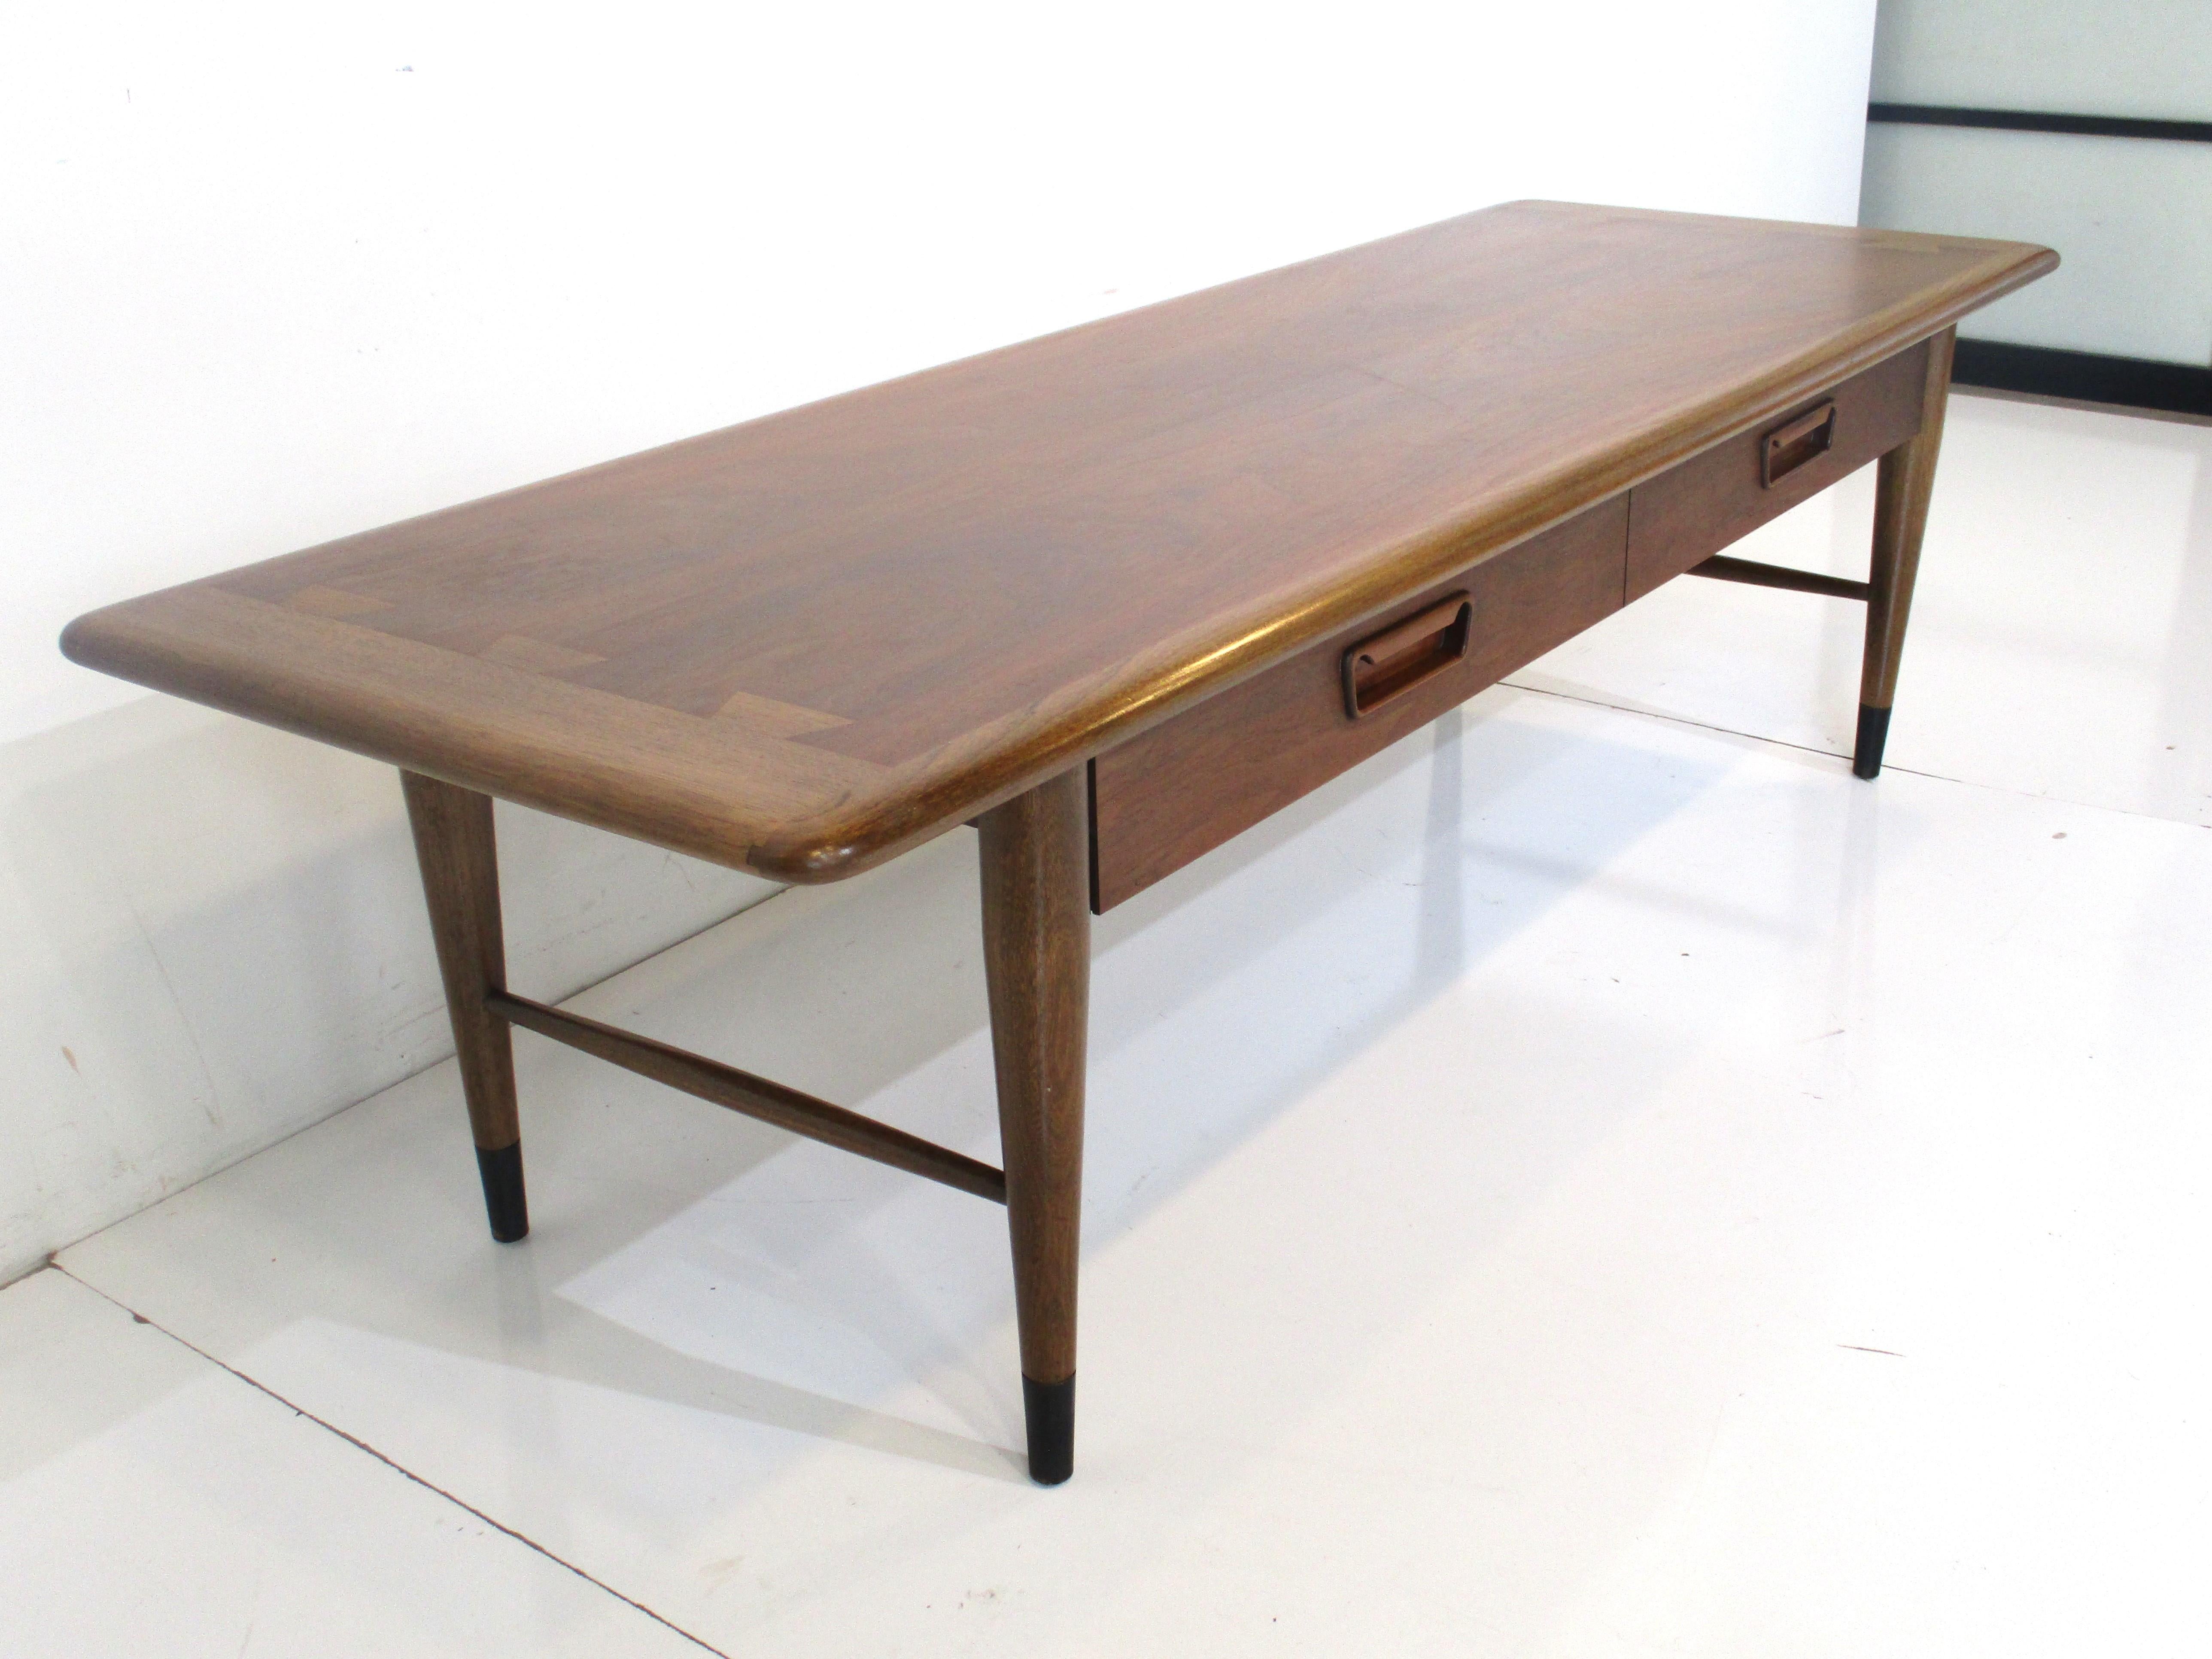 Walnut Acclaim Lane Dovetail Coffee Table with Drawer by Andre Bus